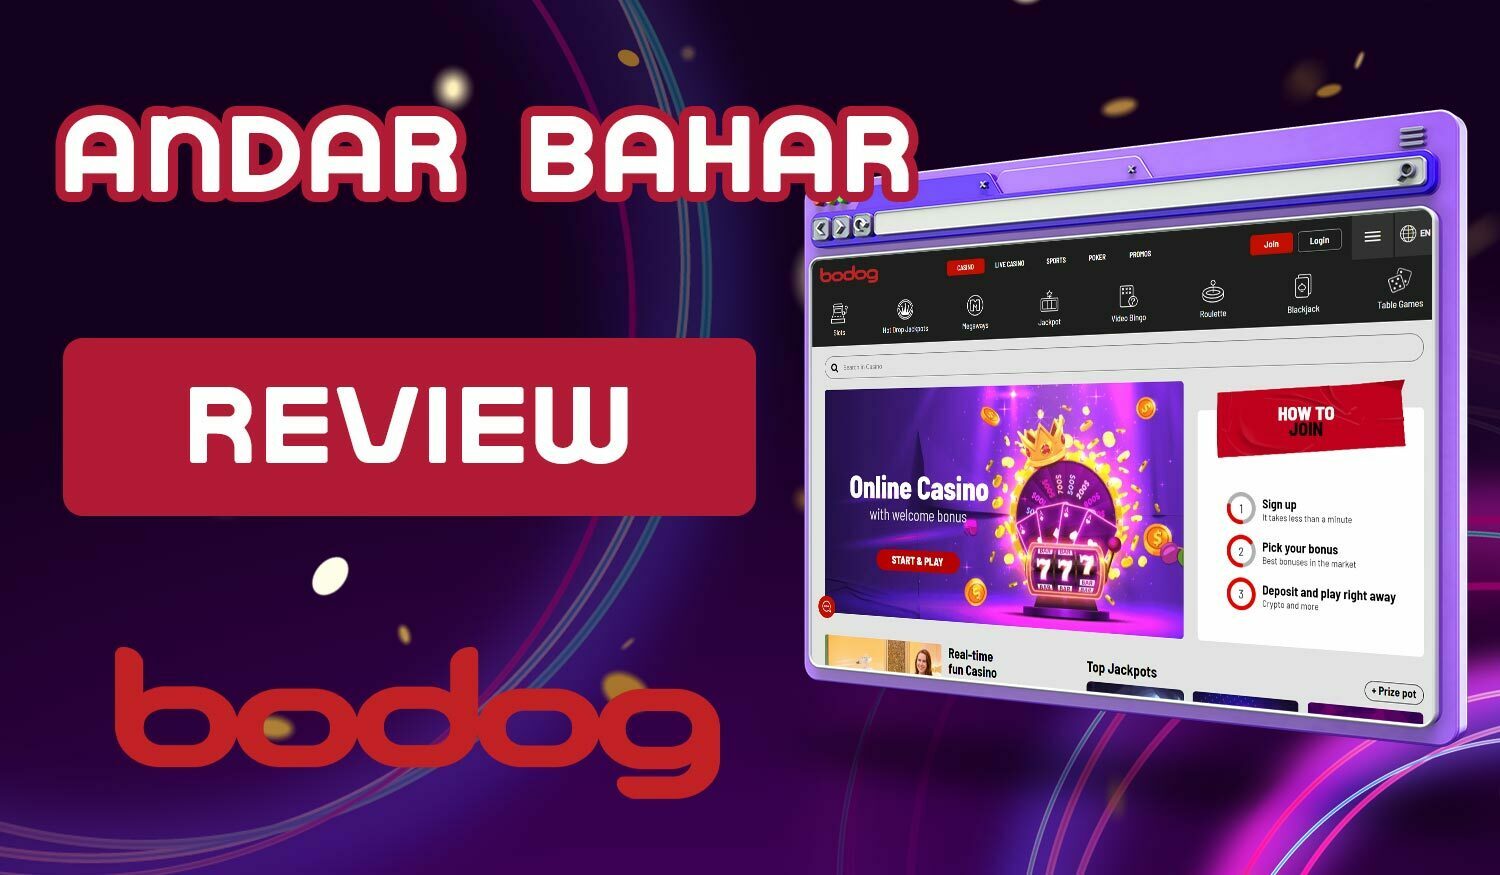 Detailed review of the Bodog bookmaker on Andar Bahars